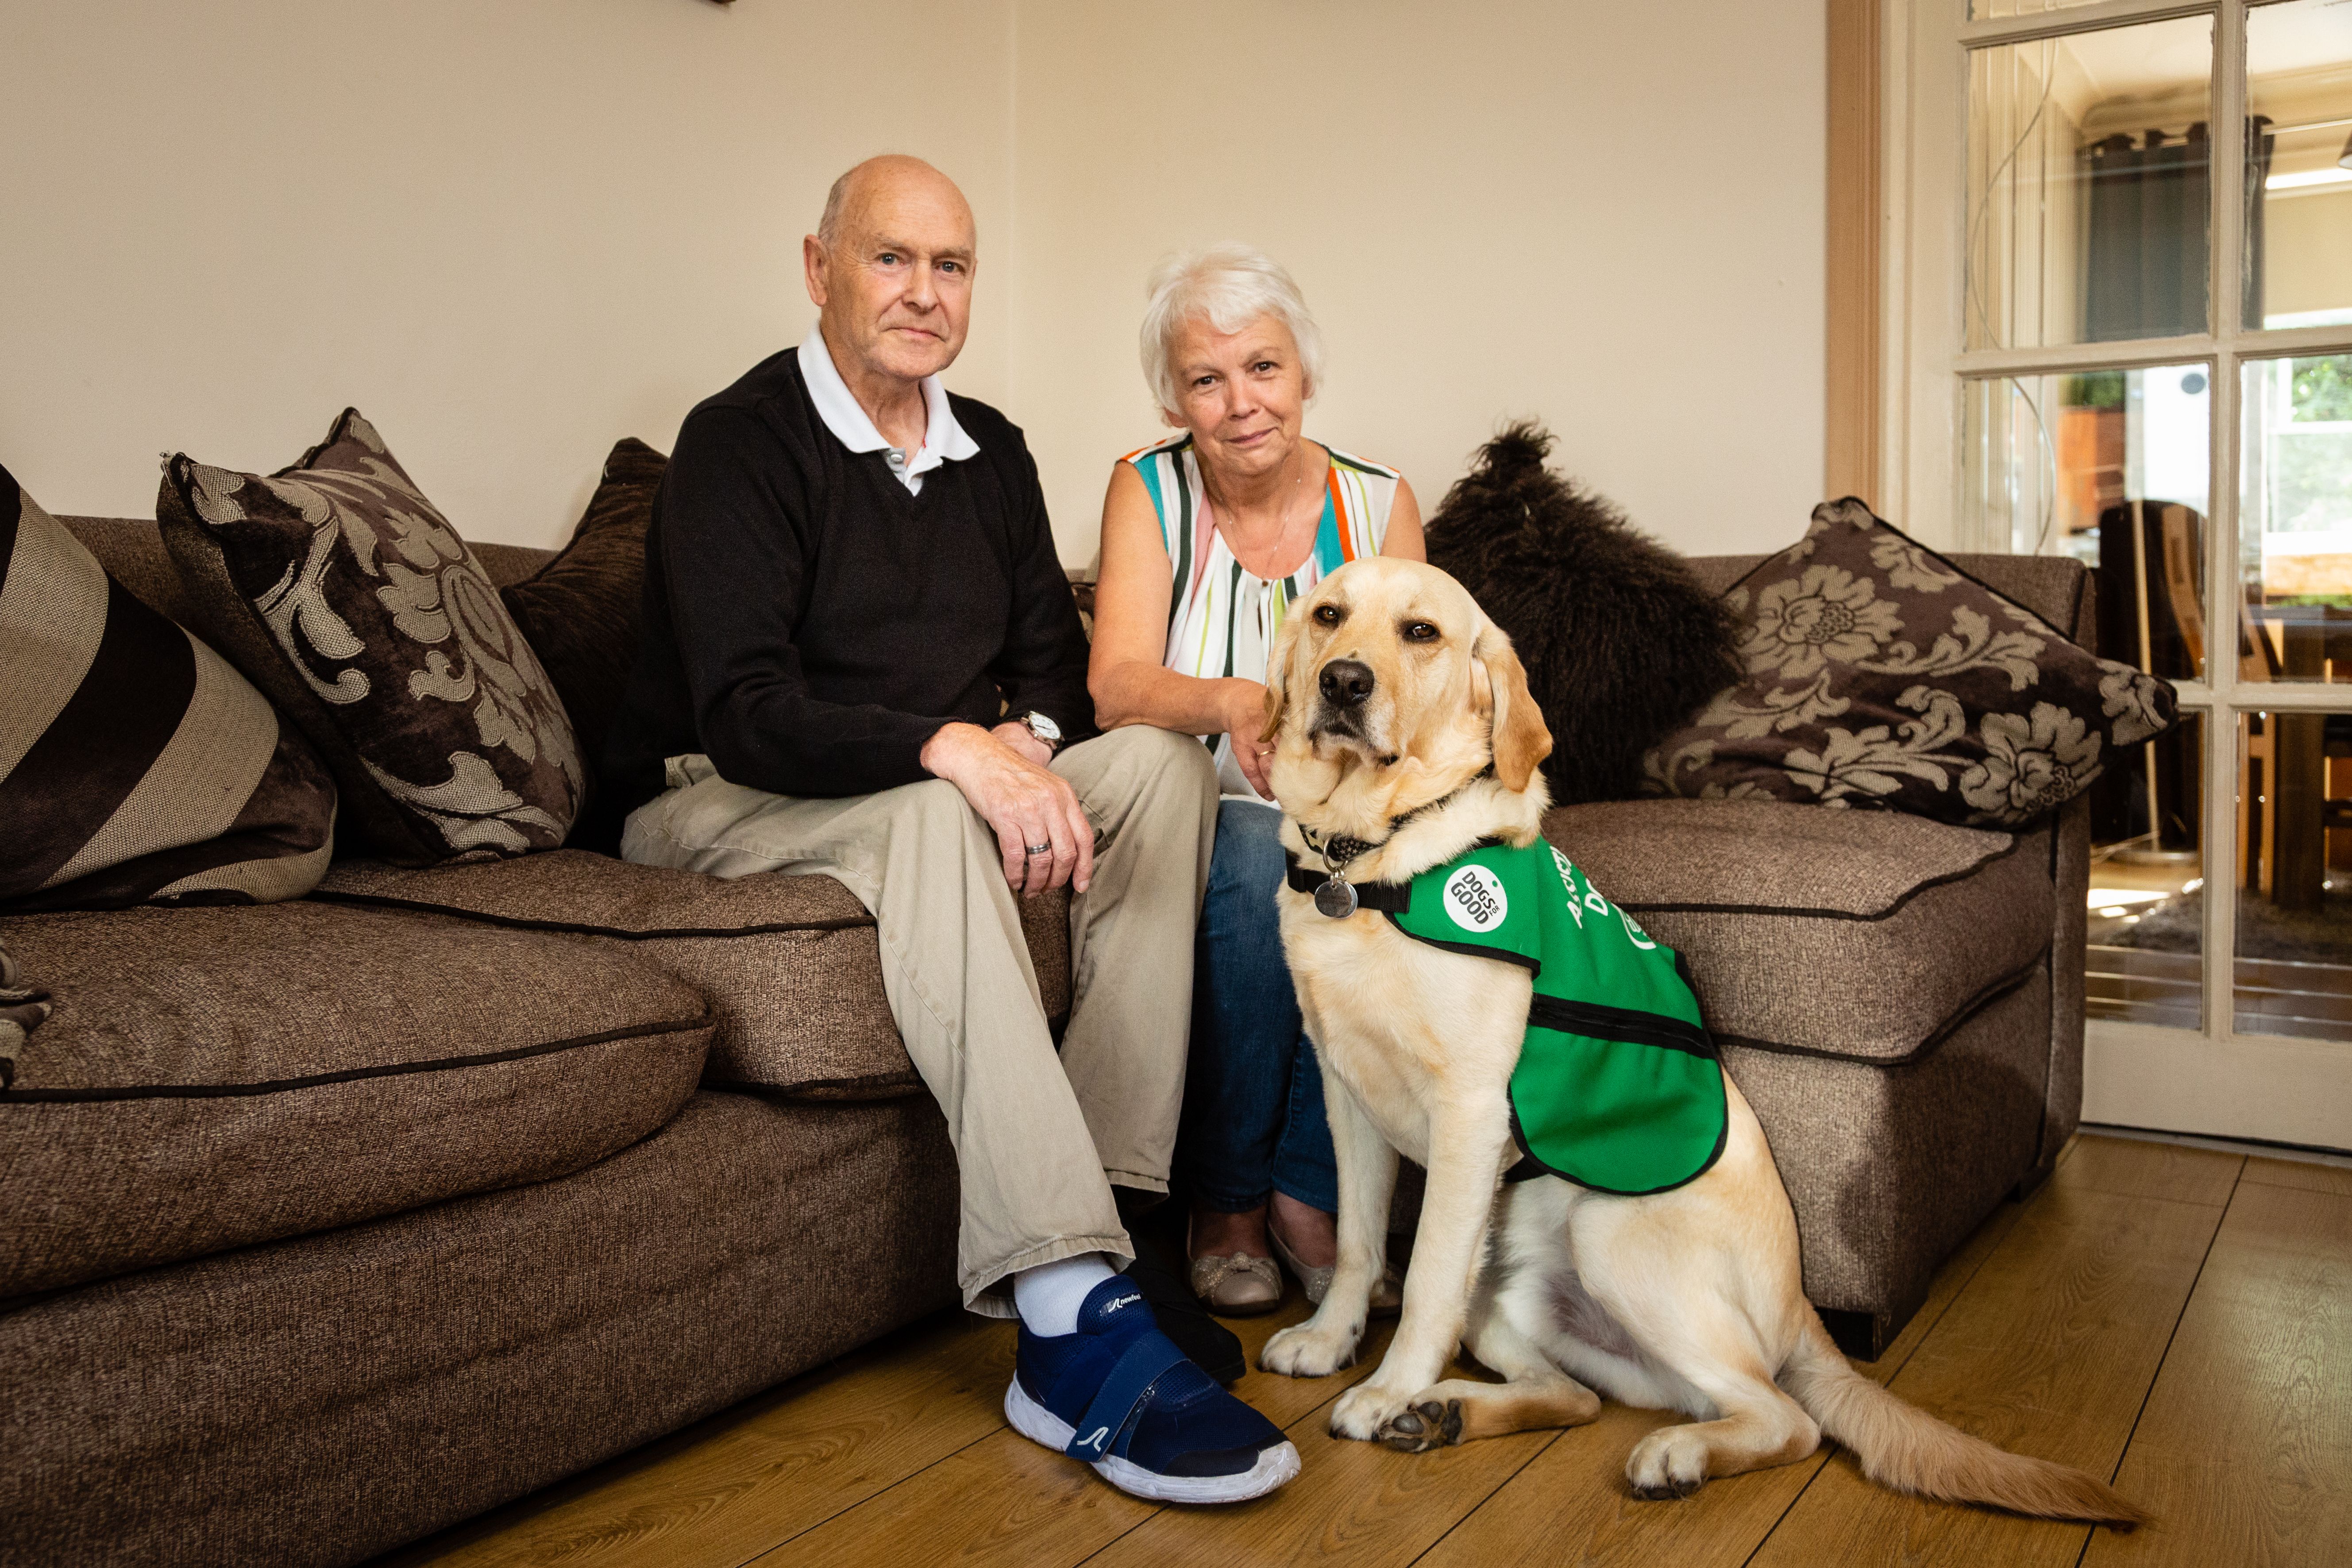 Project in Glasgow helping people with dementia - with the help of dogs